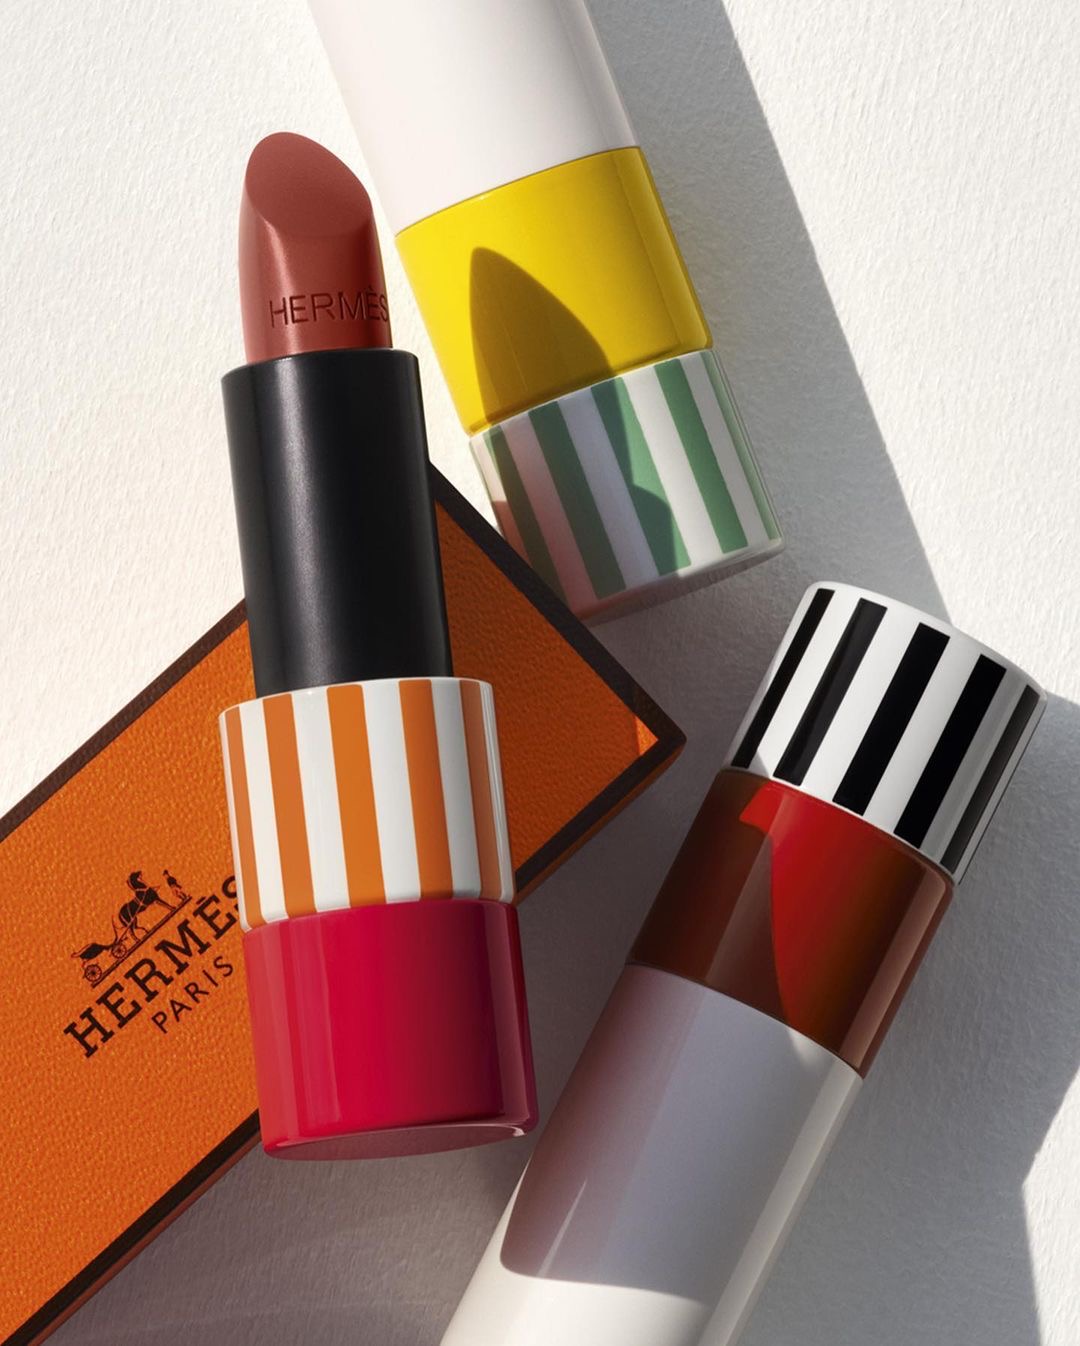 Hermes Beauty - All Must-Have Products and Why You Need Them Now 